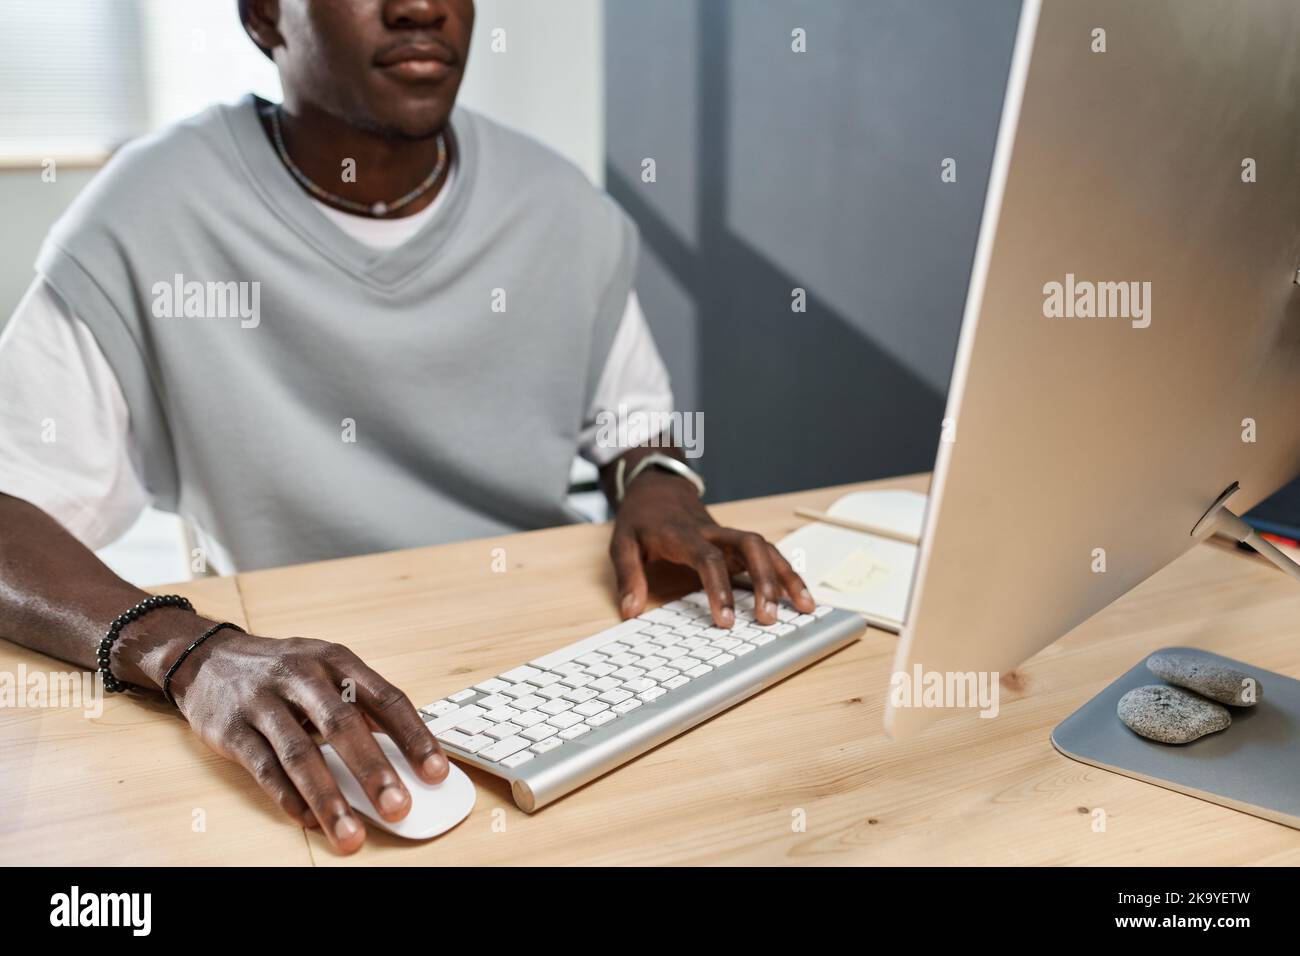 Close-up of young black man in t-shirt clicking on mouse and pressing button of computer keyboard while working in front of monitor Stock Photo